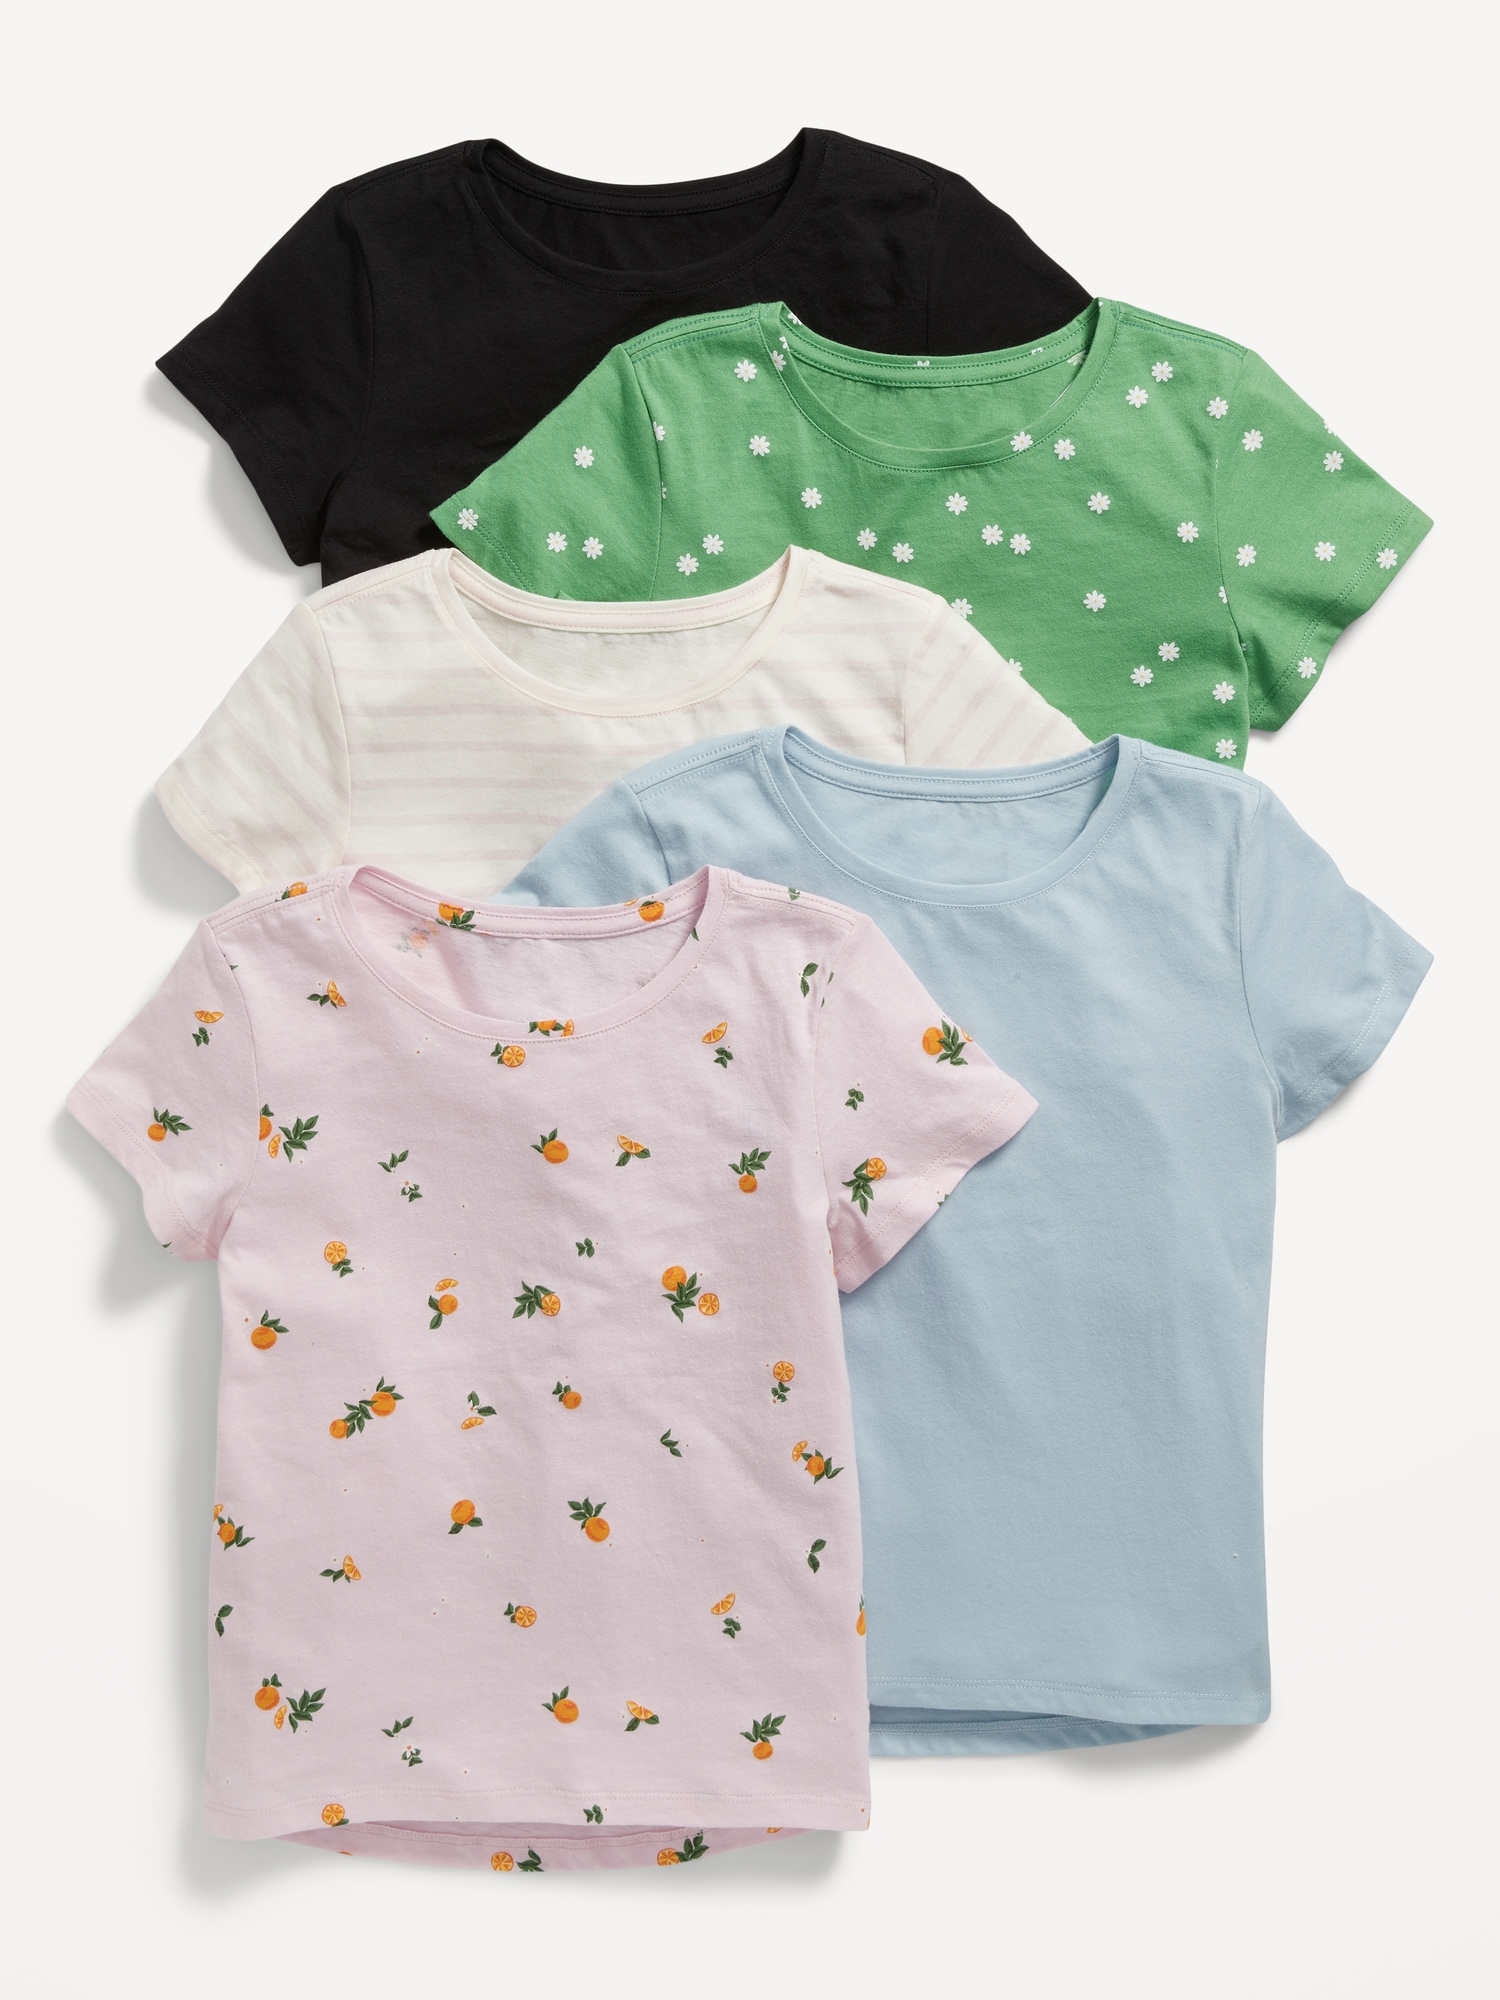 Old Navy Softest Printed T-Shirt 5-Pack for Girls green. 1